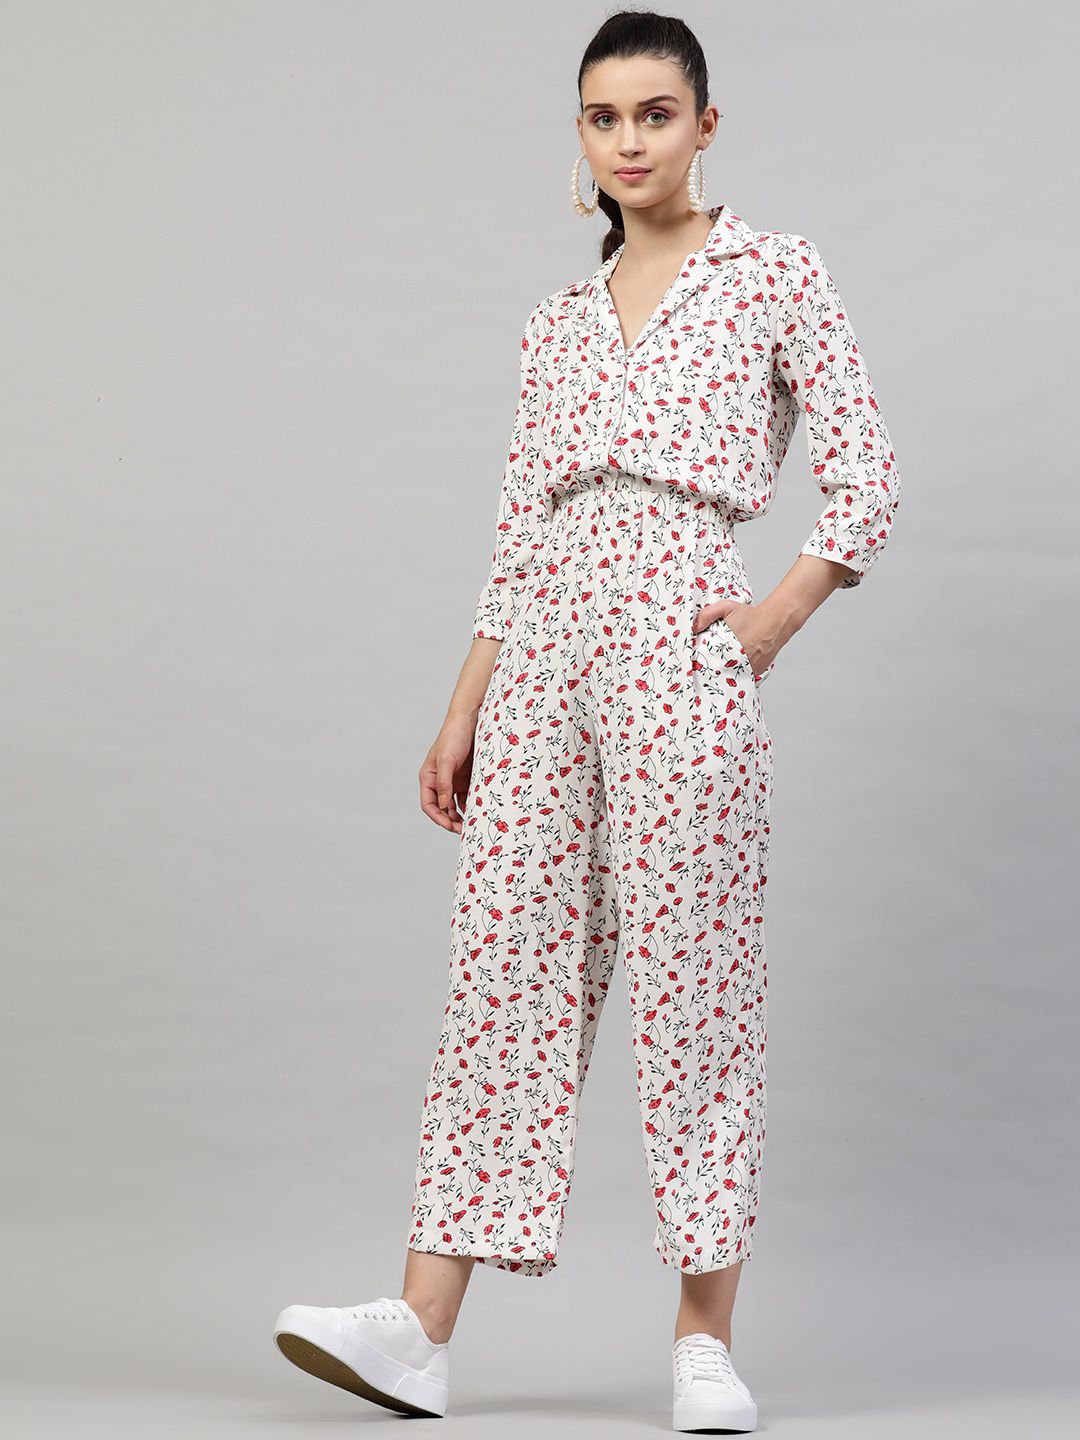 STREET 9 Women White & Red Printed Basic Jumpsuit Price in India